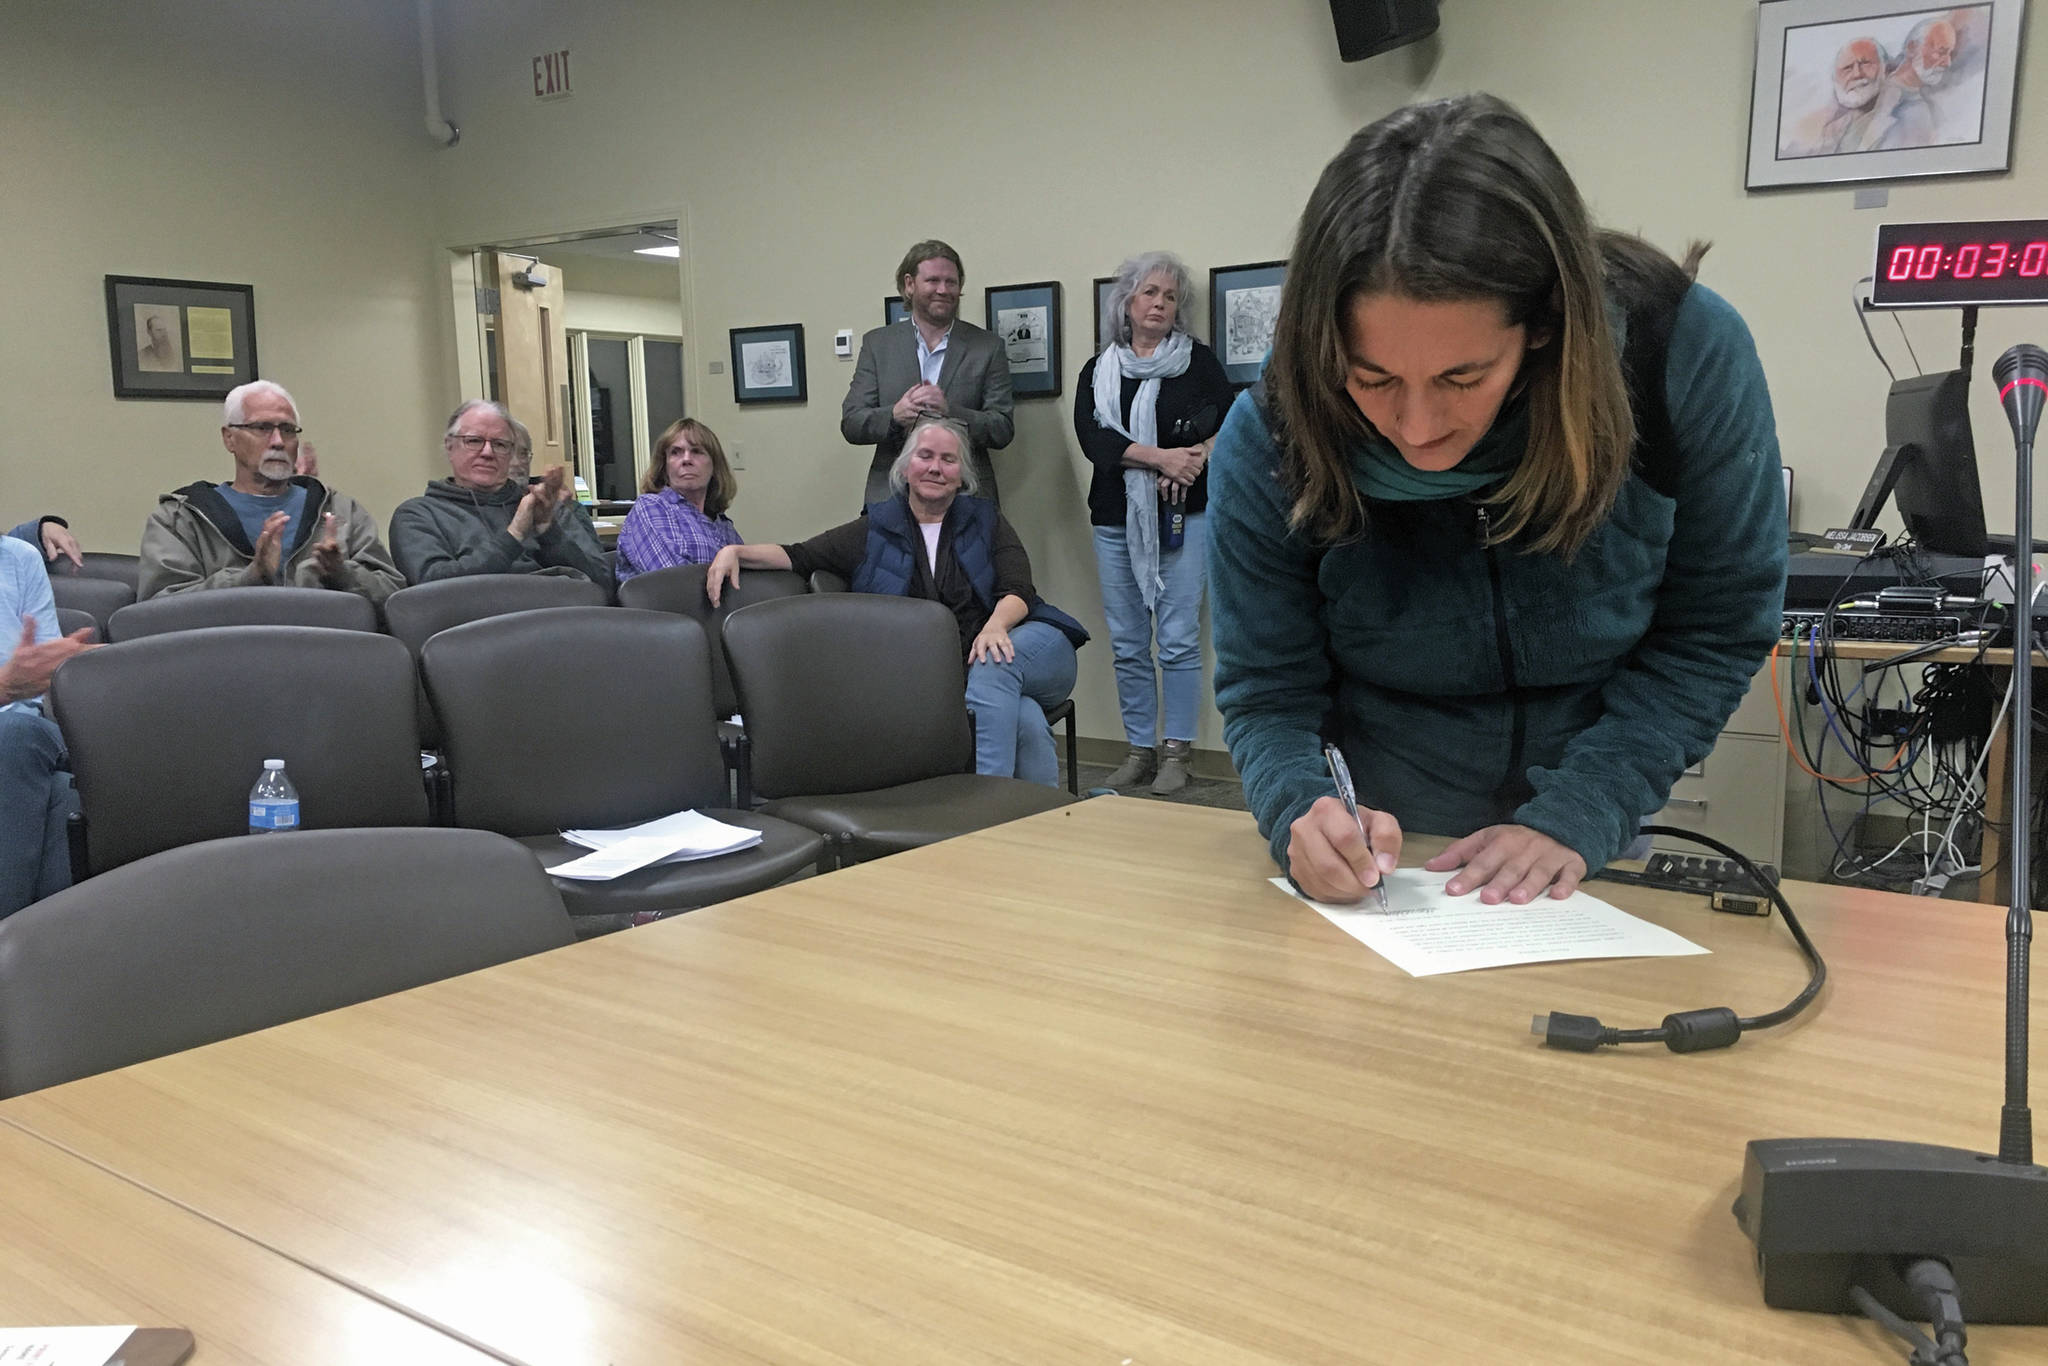 Storm Hansen-Cavasos is sworn in as a new member of the Homer City Council at a Monday, Oct. 14, 2019 council meeting at Homer City Hall in Homer, Alaska. Hansen-Cavasos’ residency prior to the election has been called into question and the council called for an official investigation. (Photo by Megan Pacer/Homer News)